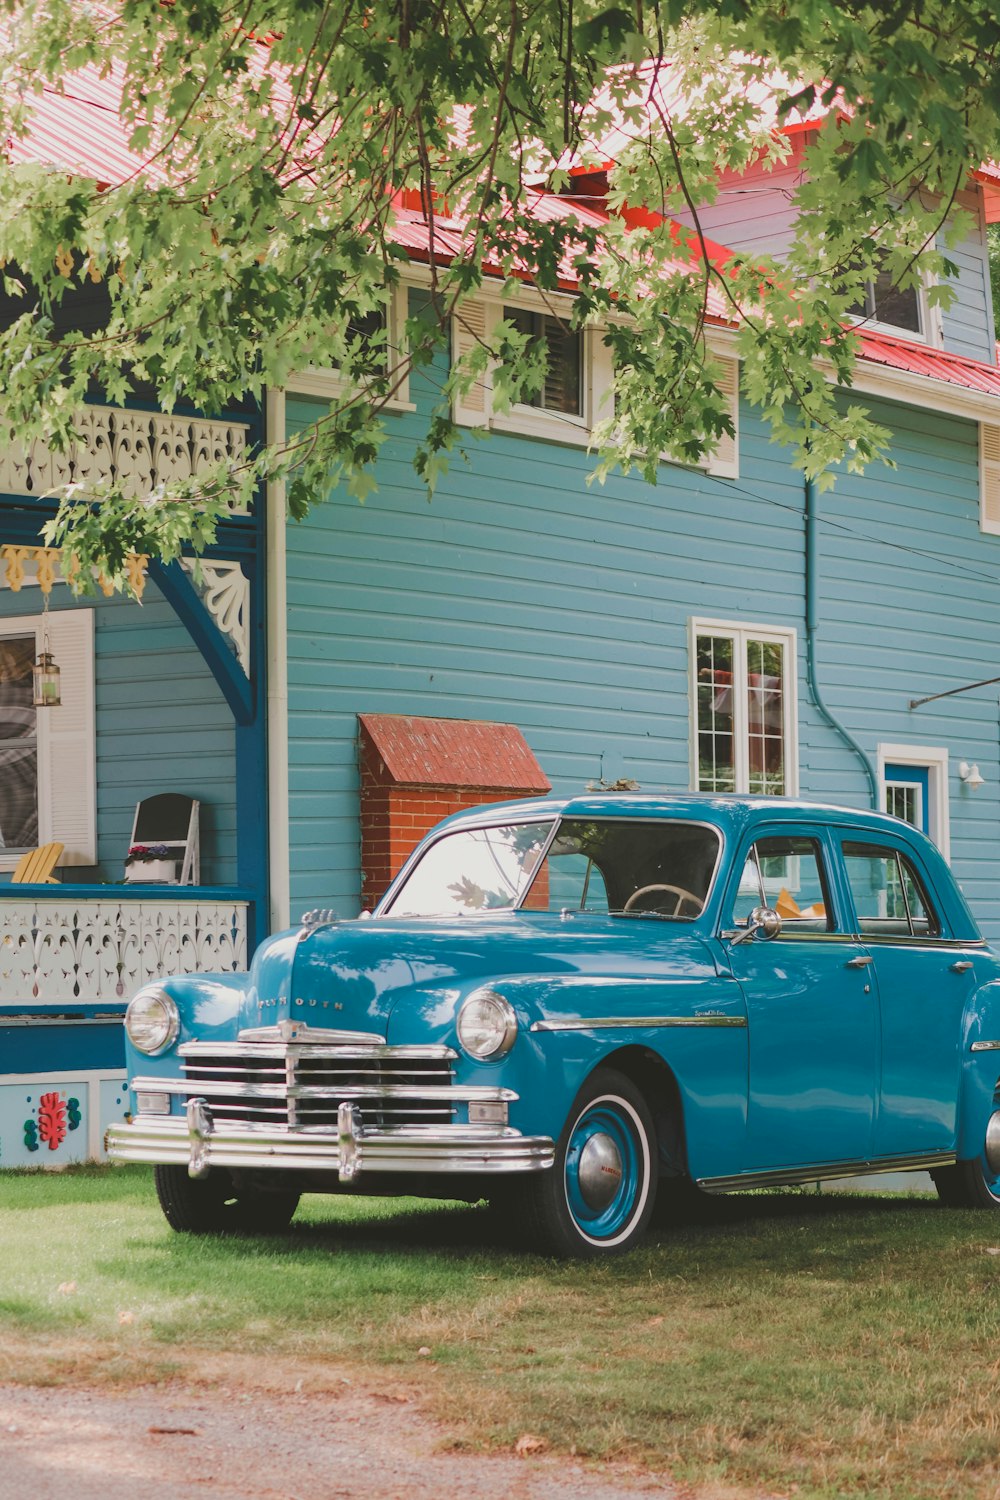 an old blue car parked in front of a house